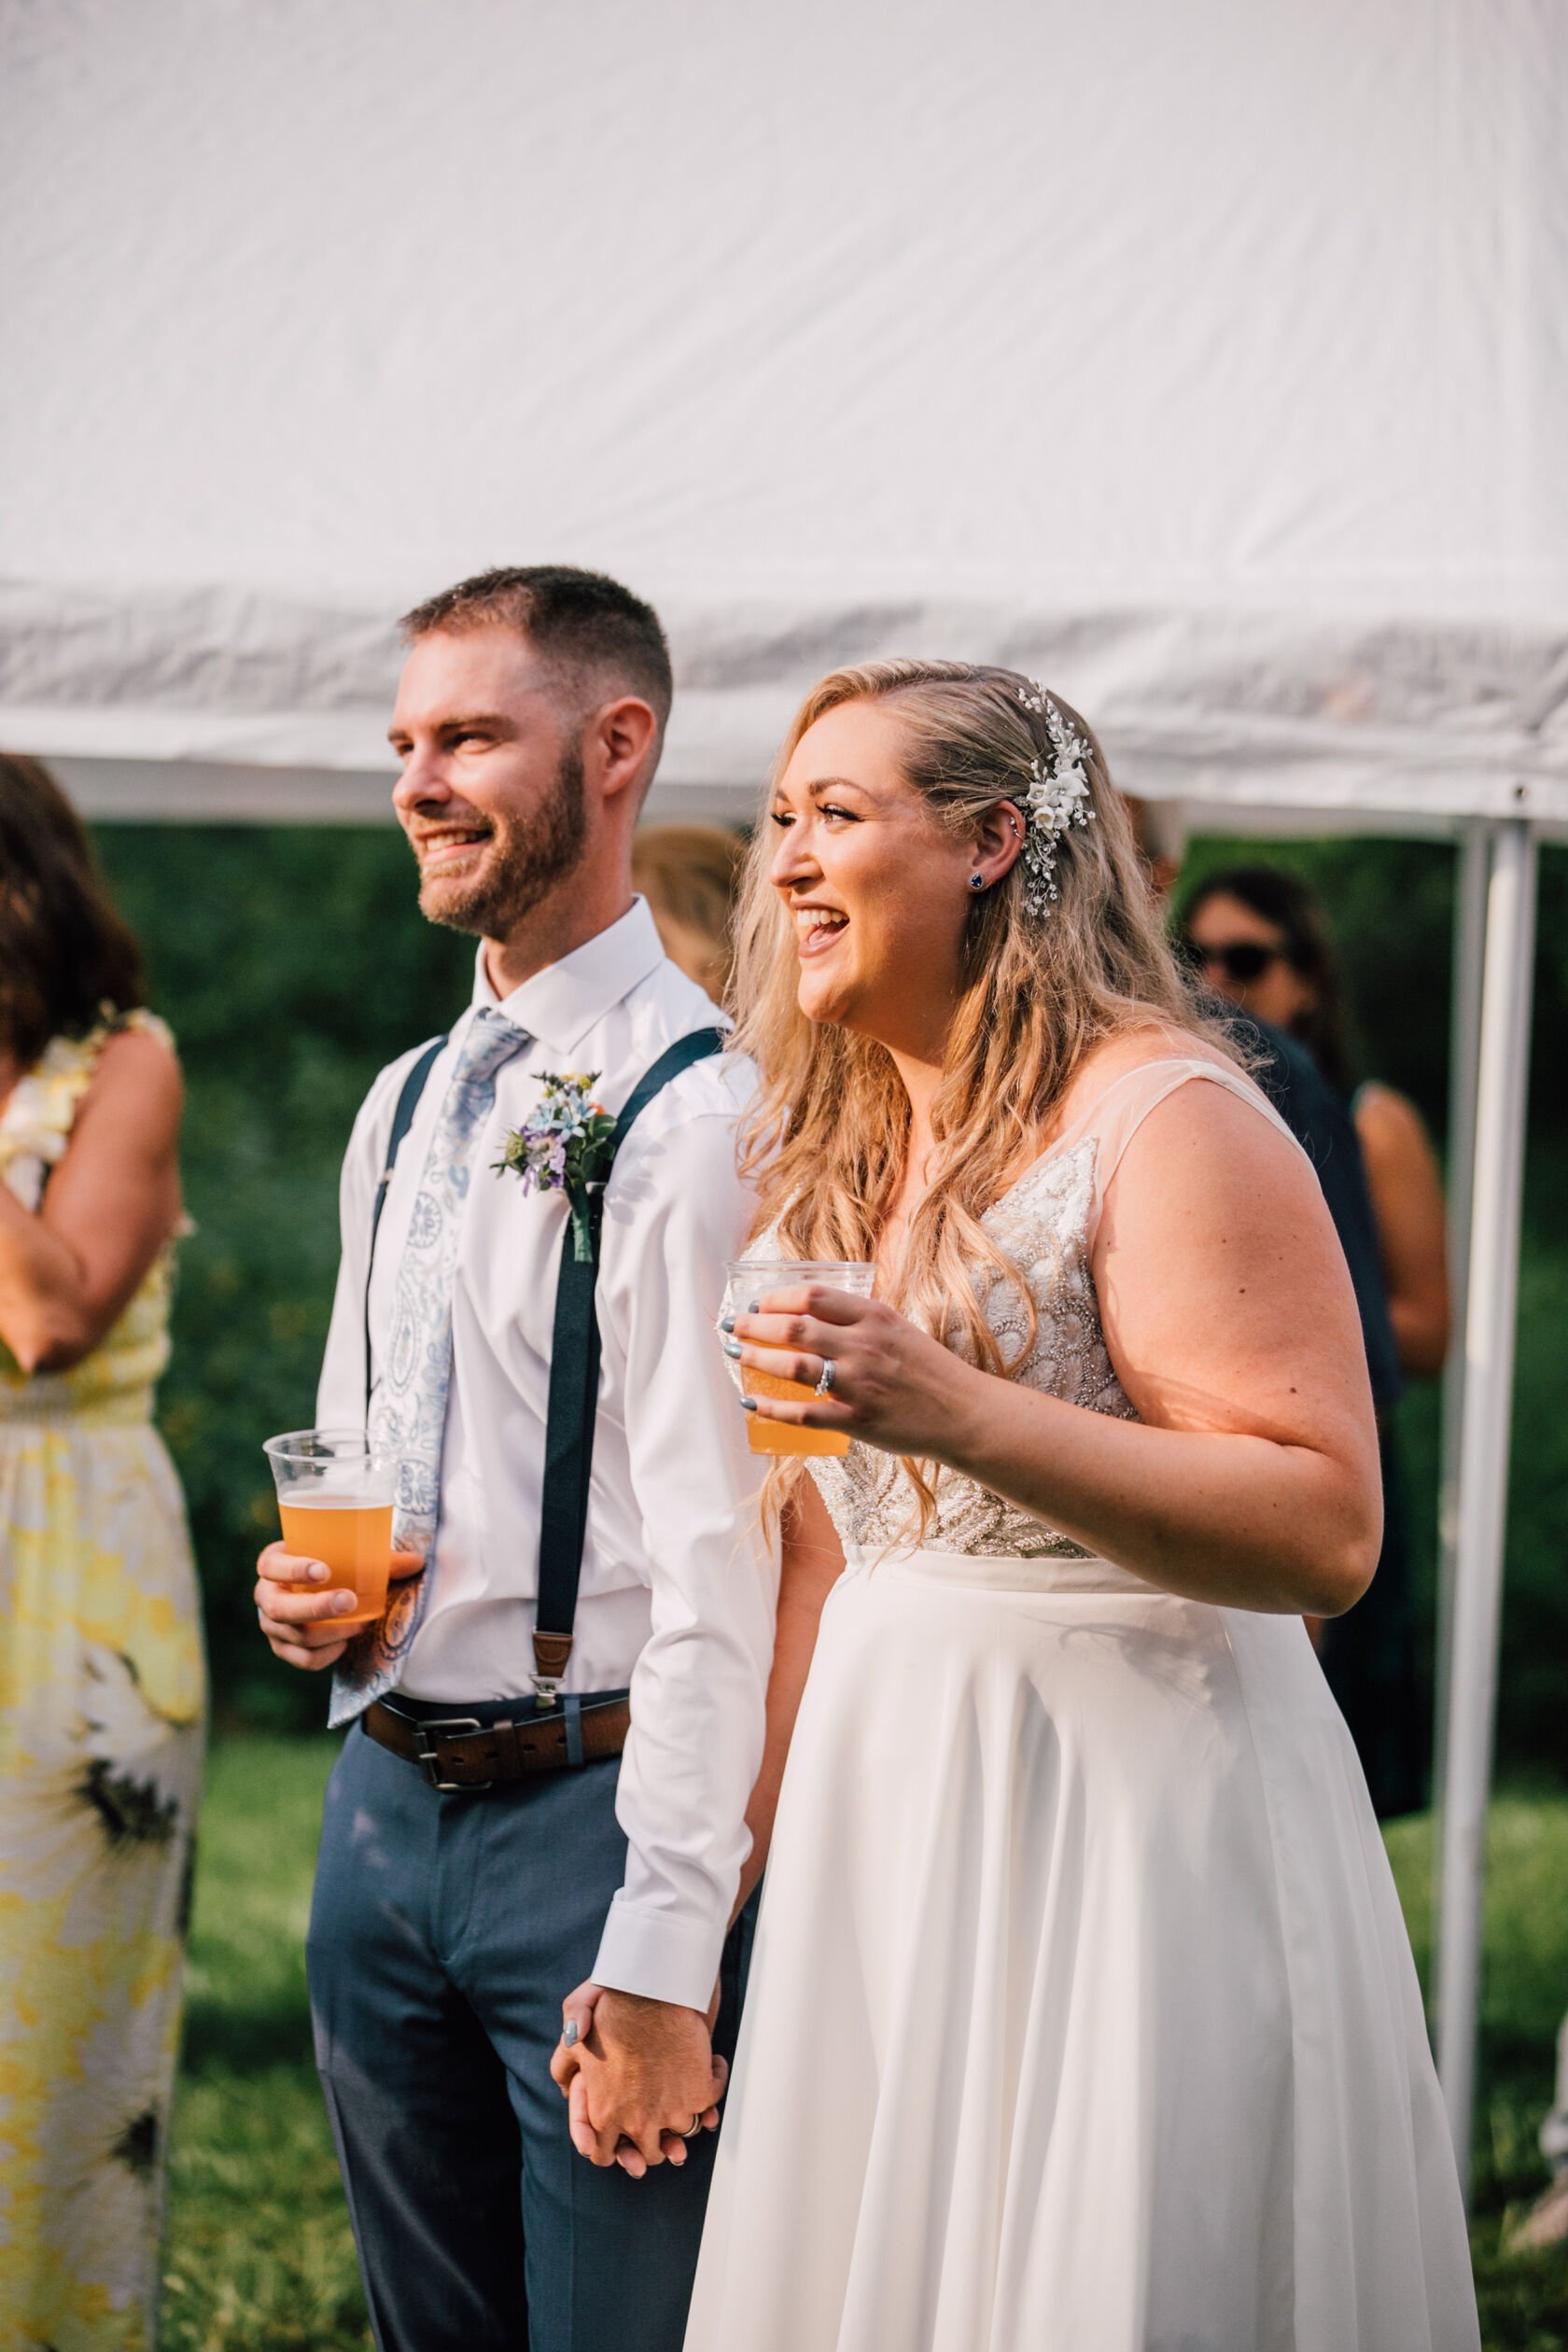  Bride and groom smile during toasts at their backyard wedding&nbsp; 